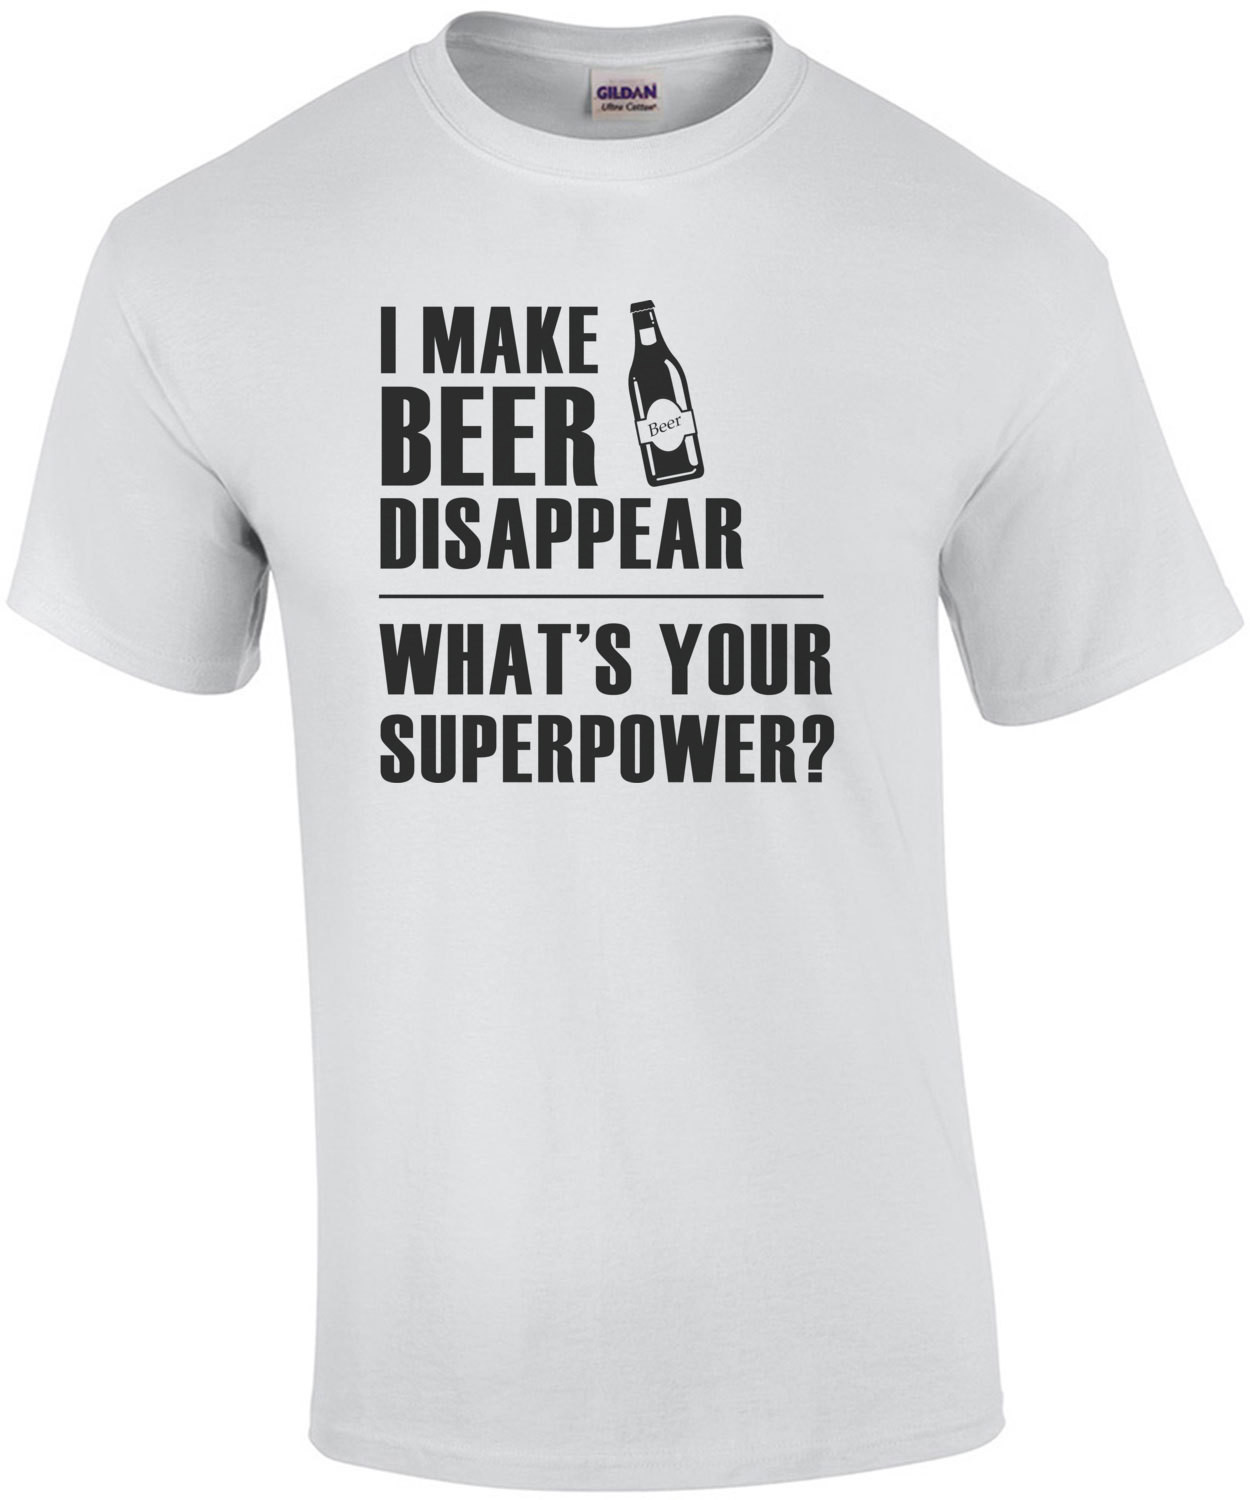 I make beer disappear - what's your superpower? Funny Beer